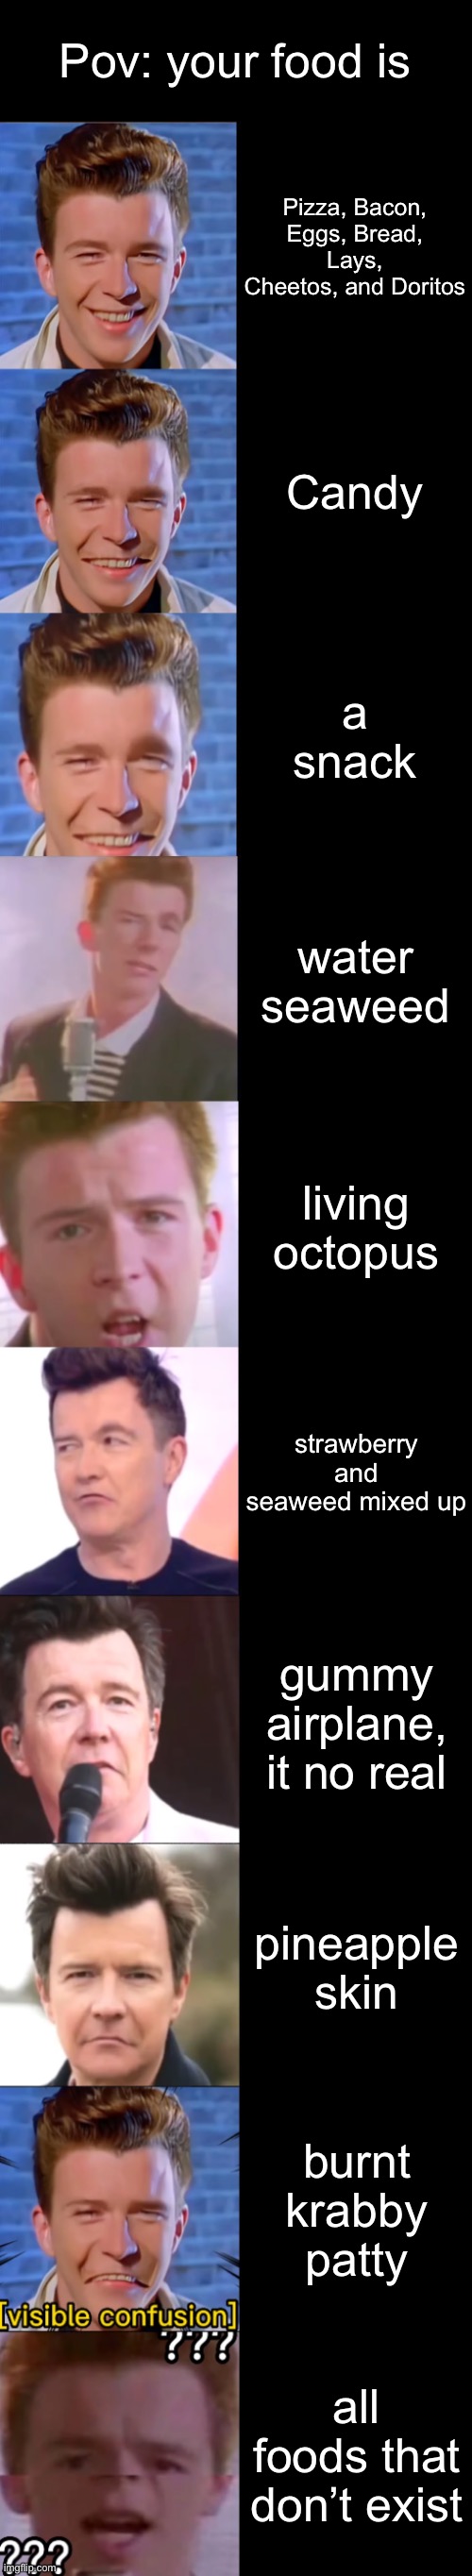 rick astley becoming confused (your food is) | Pov: your food is; Pizza, Bacon, Eggs, Bread, Lays, Cheetos, and Doritos; Candy; a snack; water seaweed; living octopus; strawberry and seaweed mixed up; gummy airplane, it no real; pineapple skin; burnt krabby patty; all foods that don’t exist | image tagged in rick astley becoming confused | made w/ Imgflip meme maker